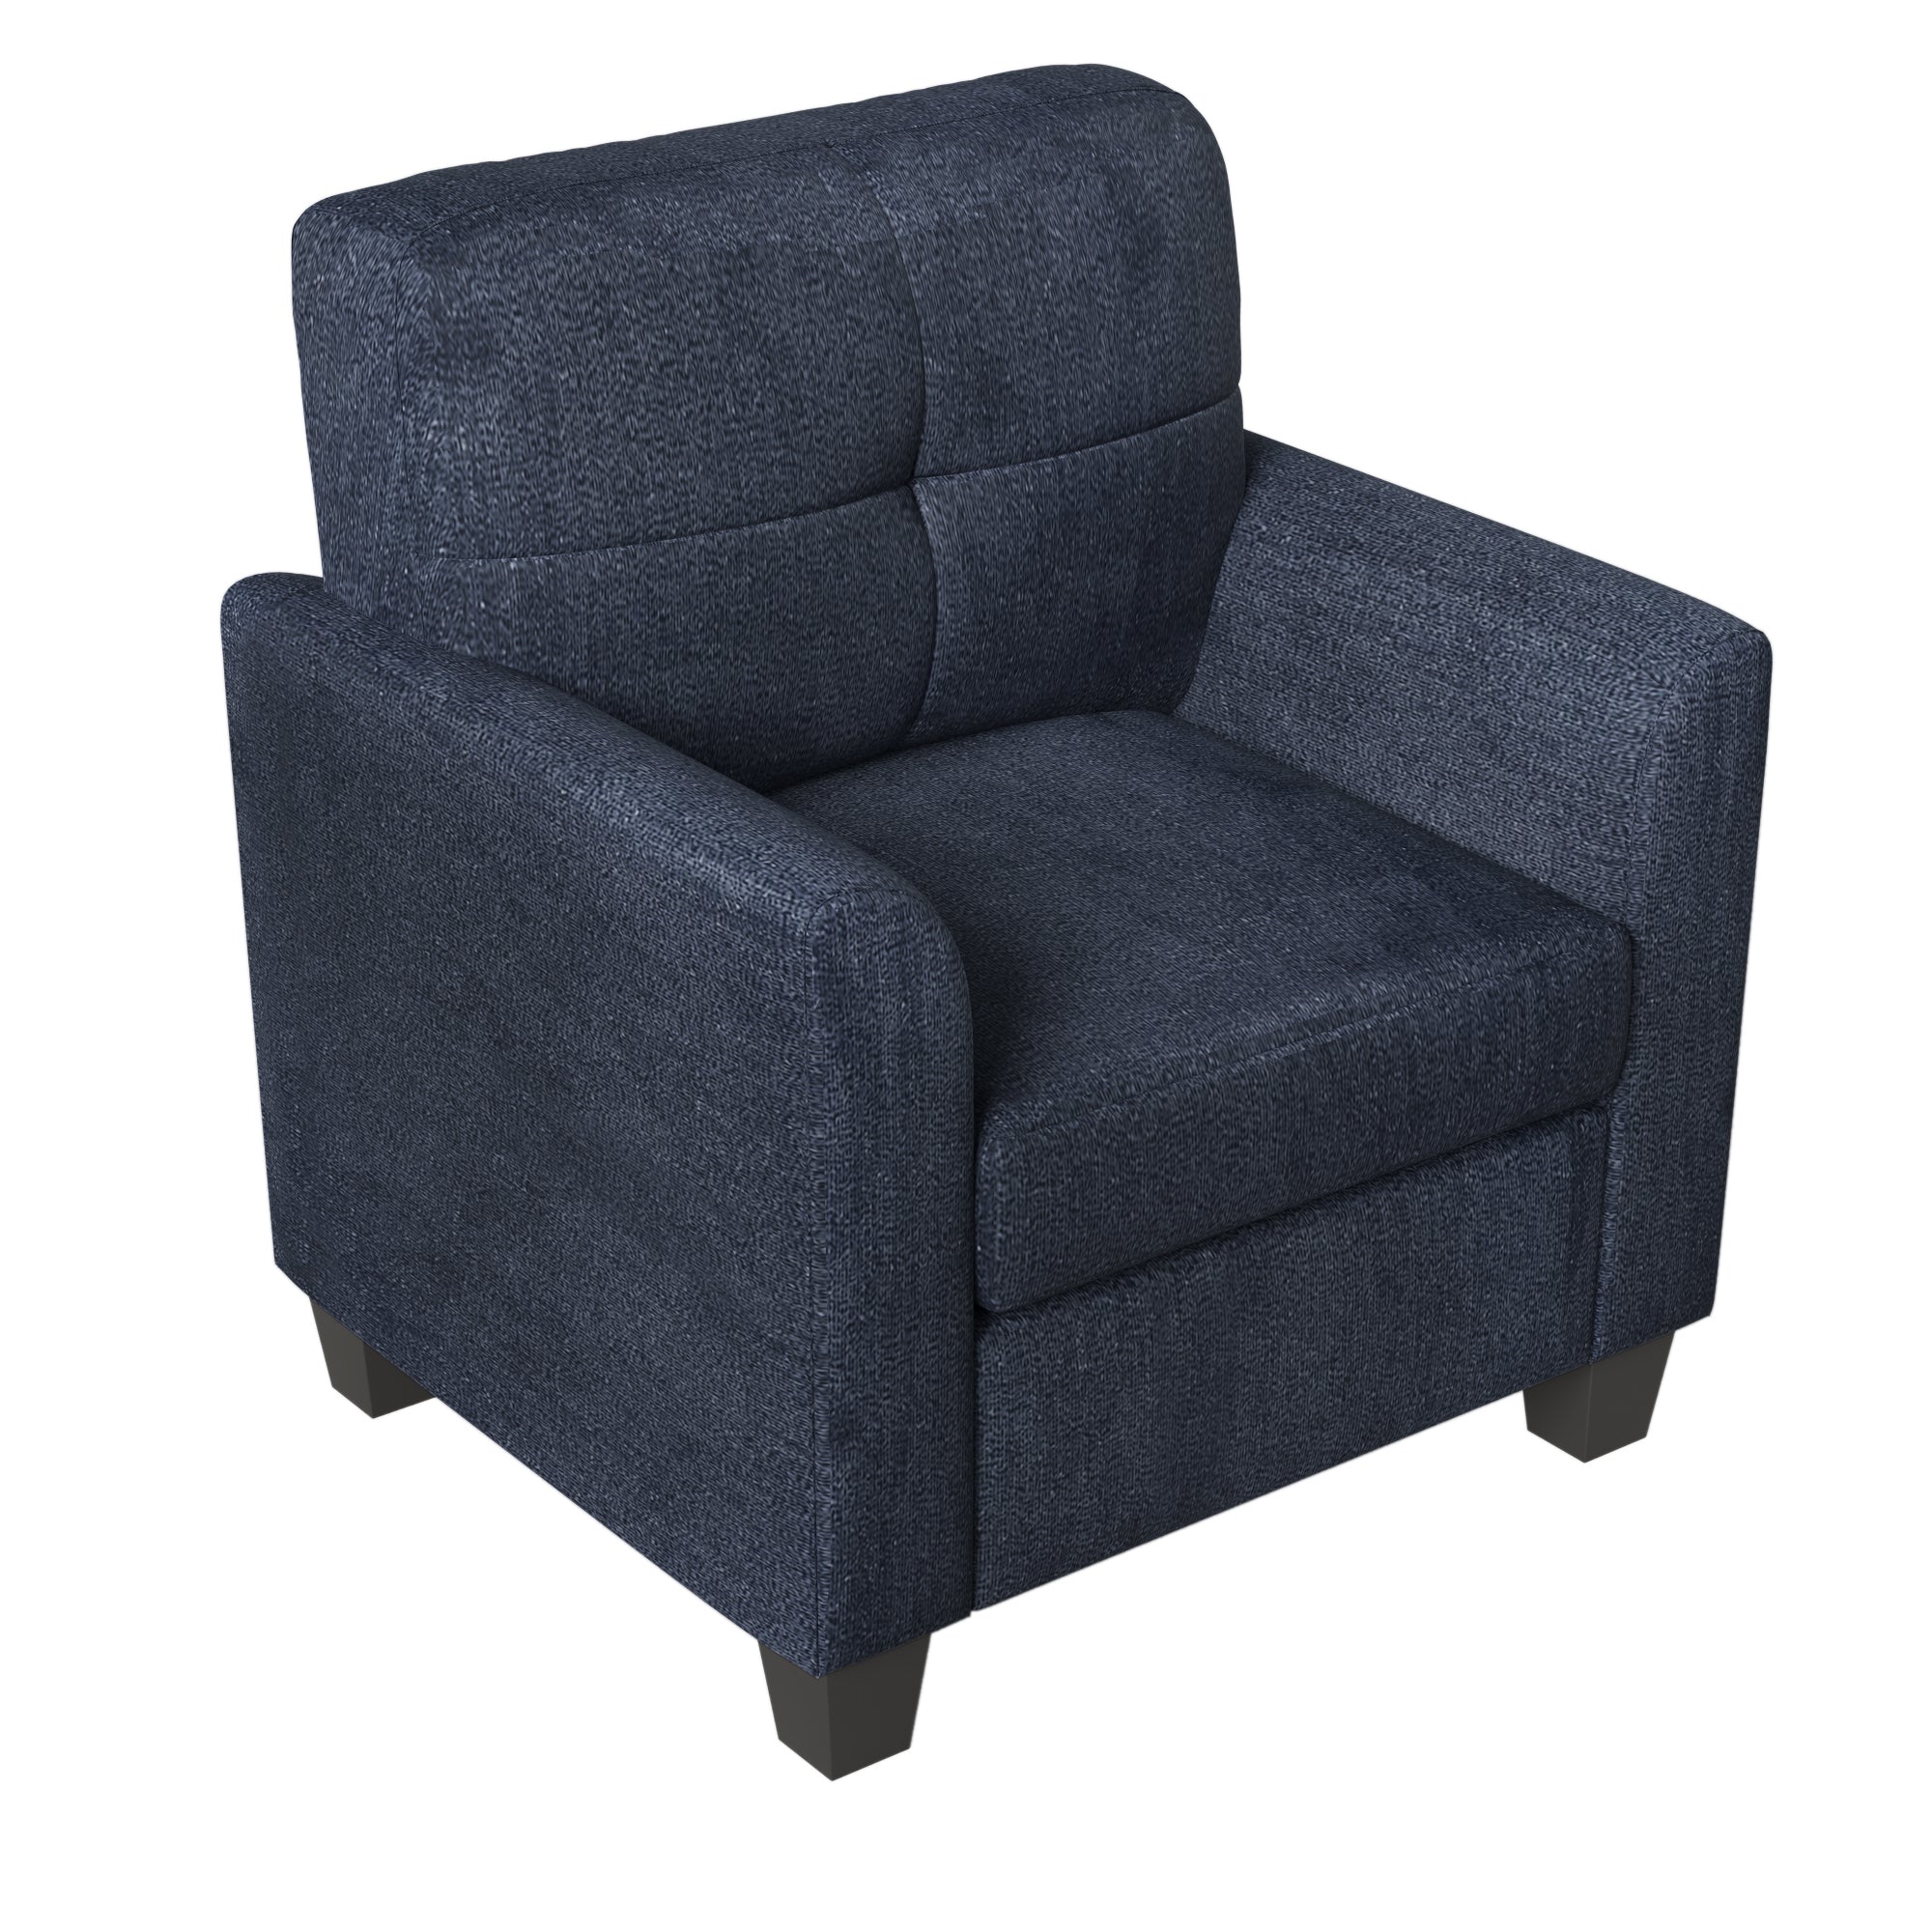 Mid Century Modern Accent Chair Cozy Armchair Button dark blue-primary living space-polyester